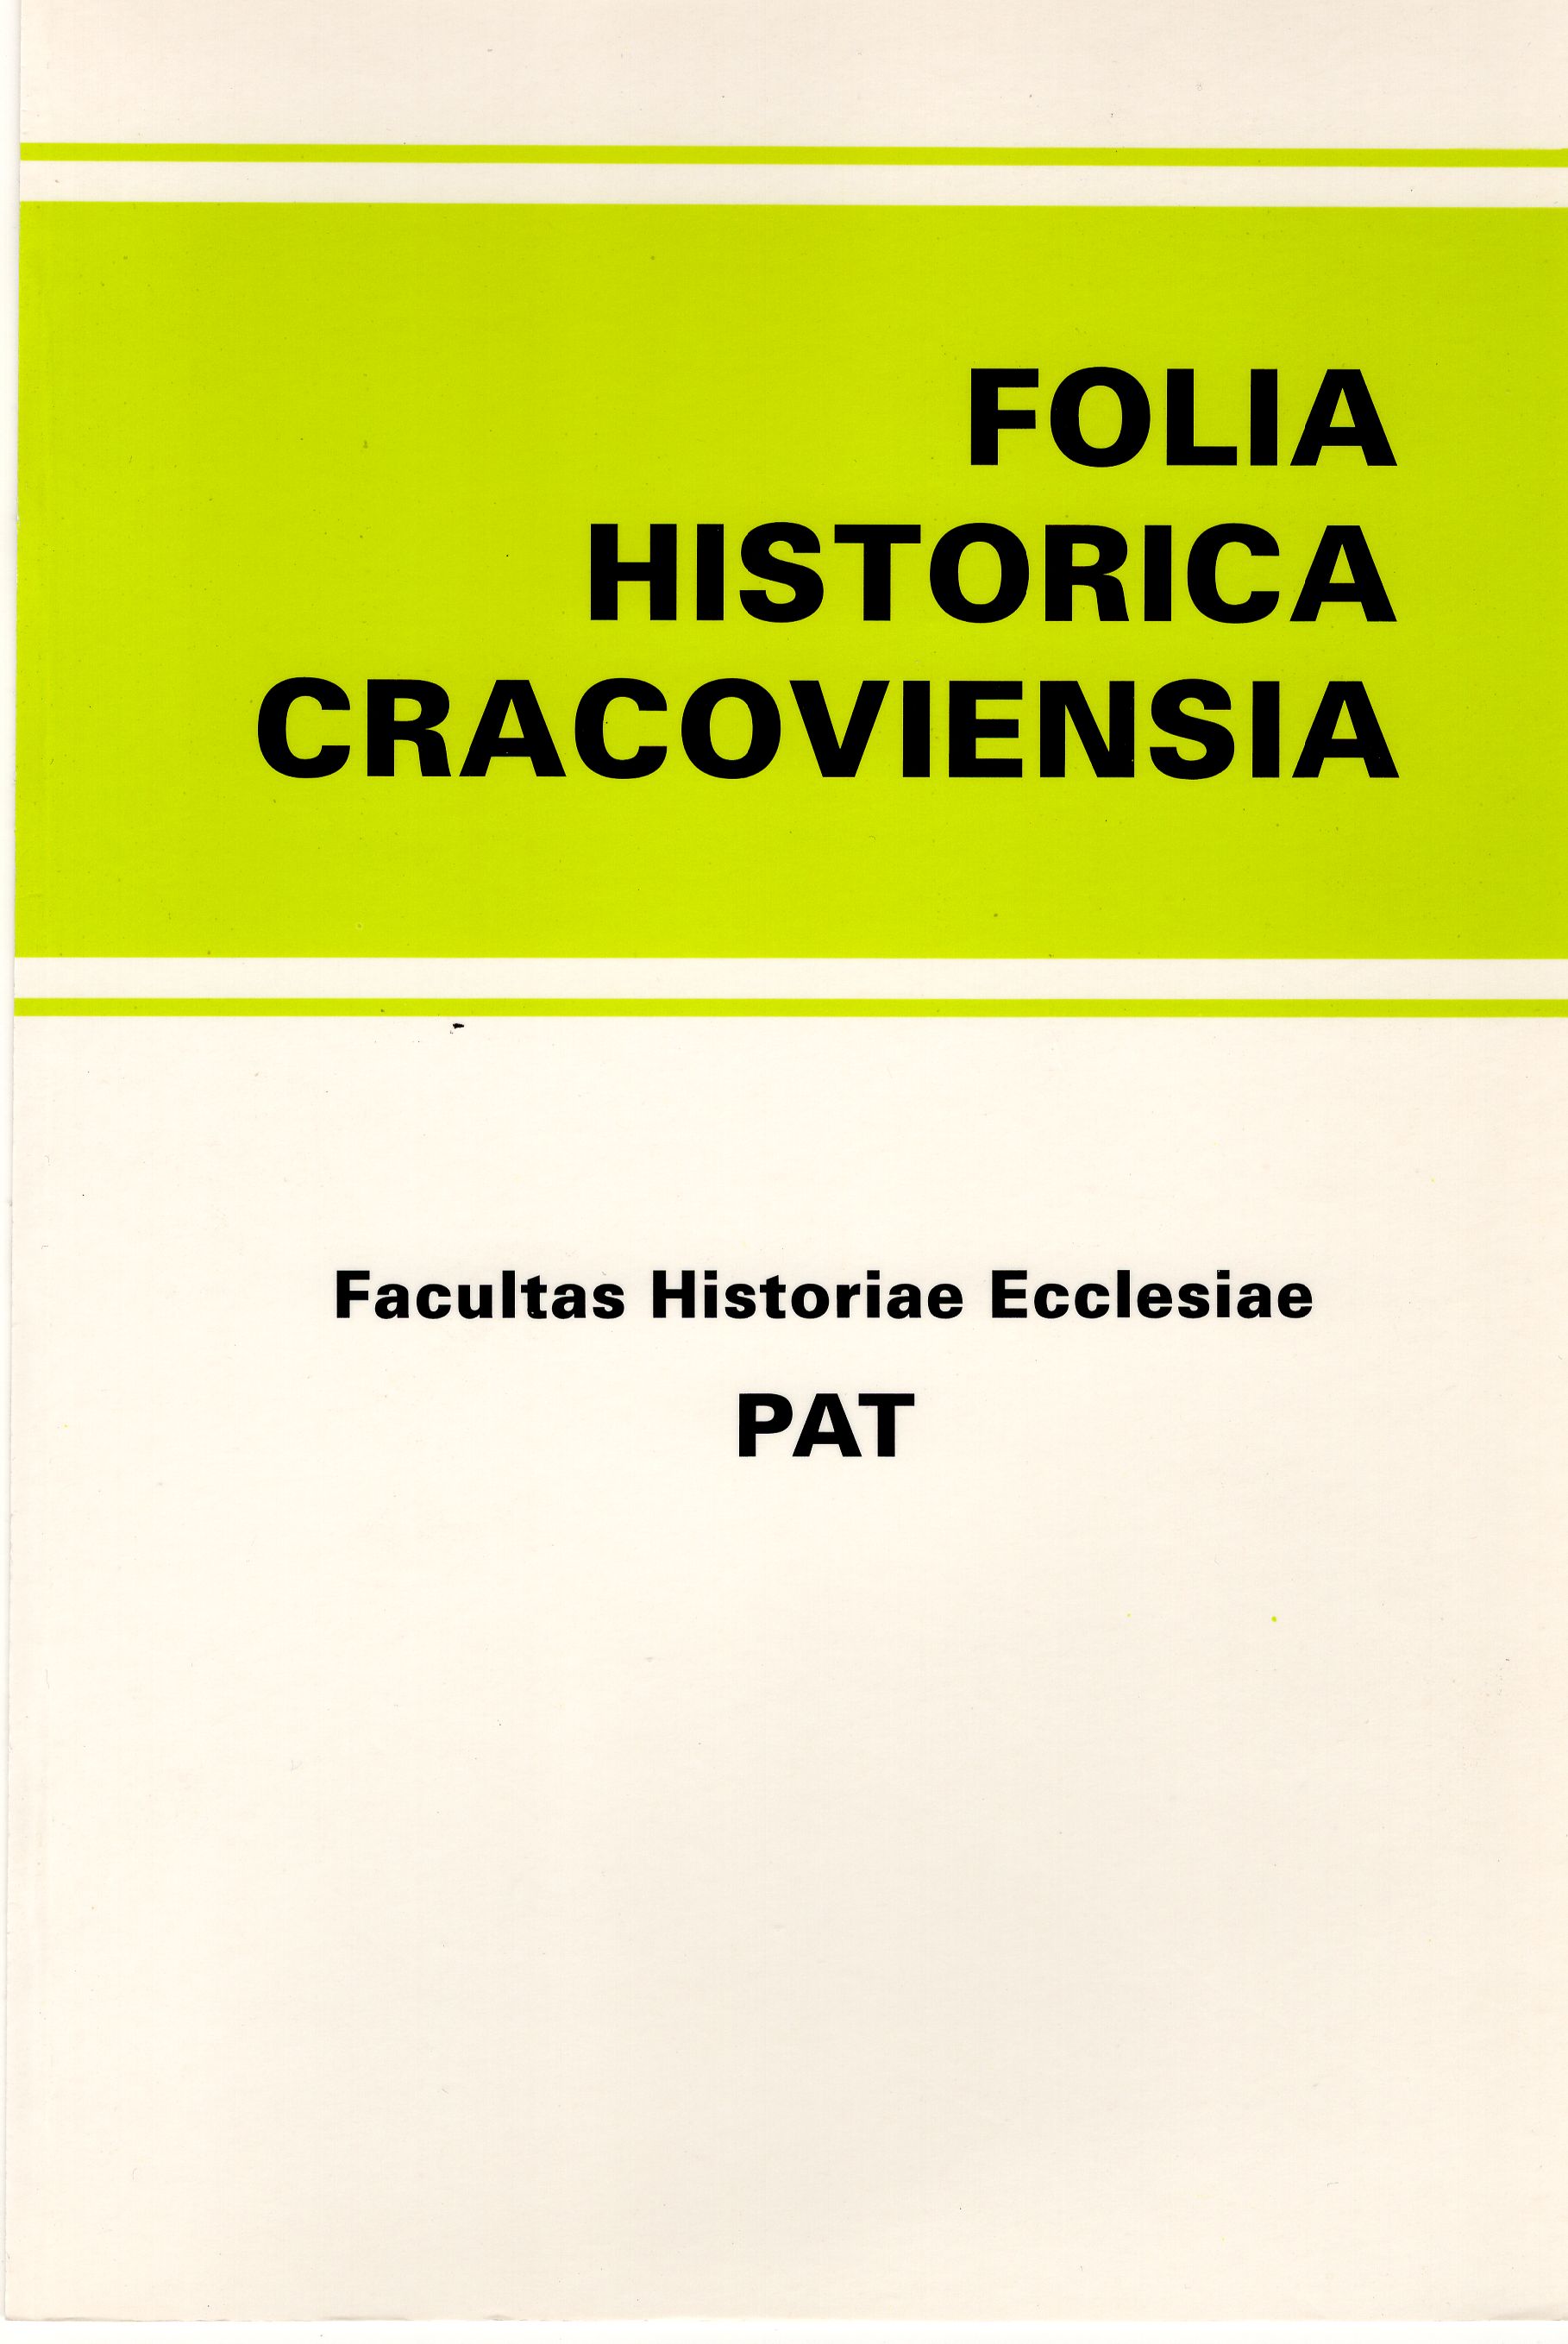 Periodicals issued by the St Vincent's Congregation of Missionary Priests in the 19th and 20th c. Cover Image